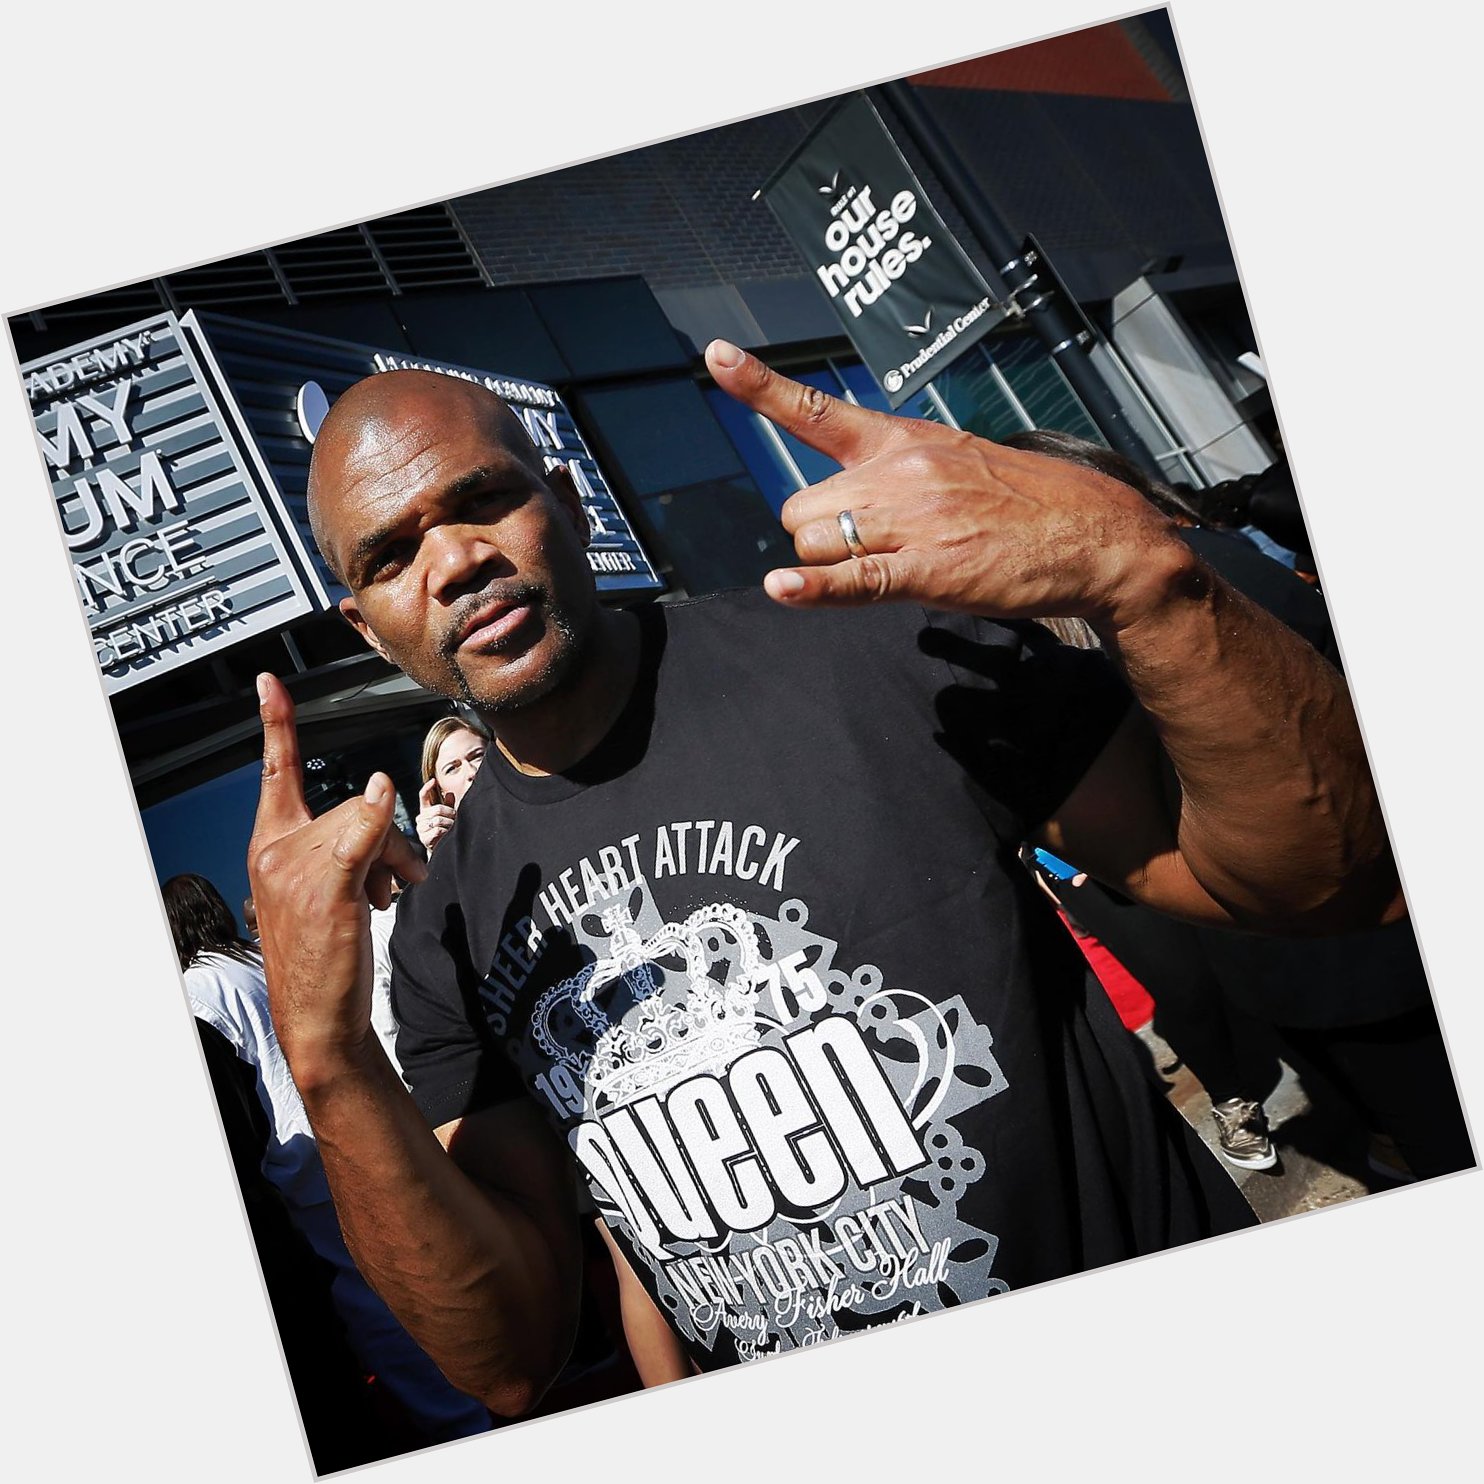 Wishing a very happy birthday to Darryl McDaniels who made my day back in 2017.  